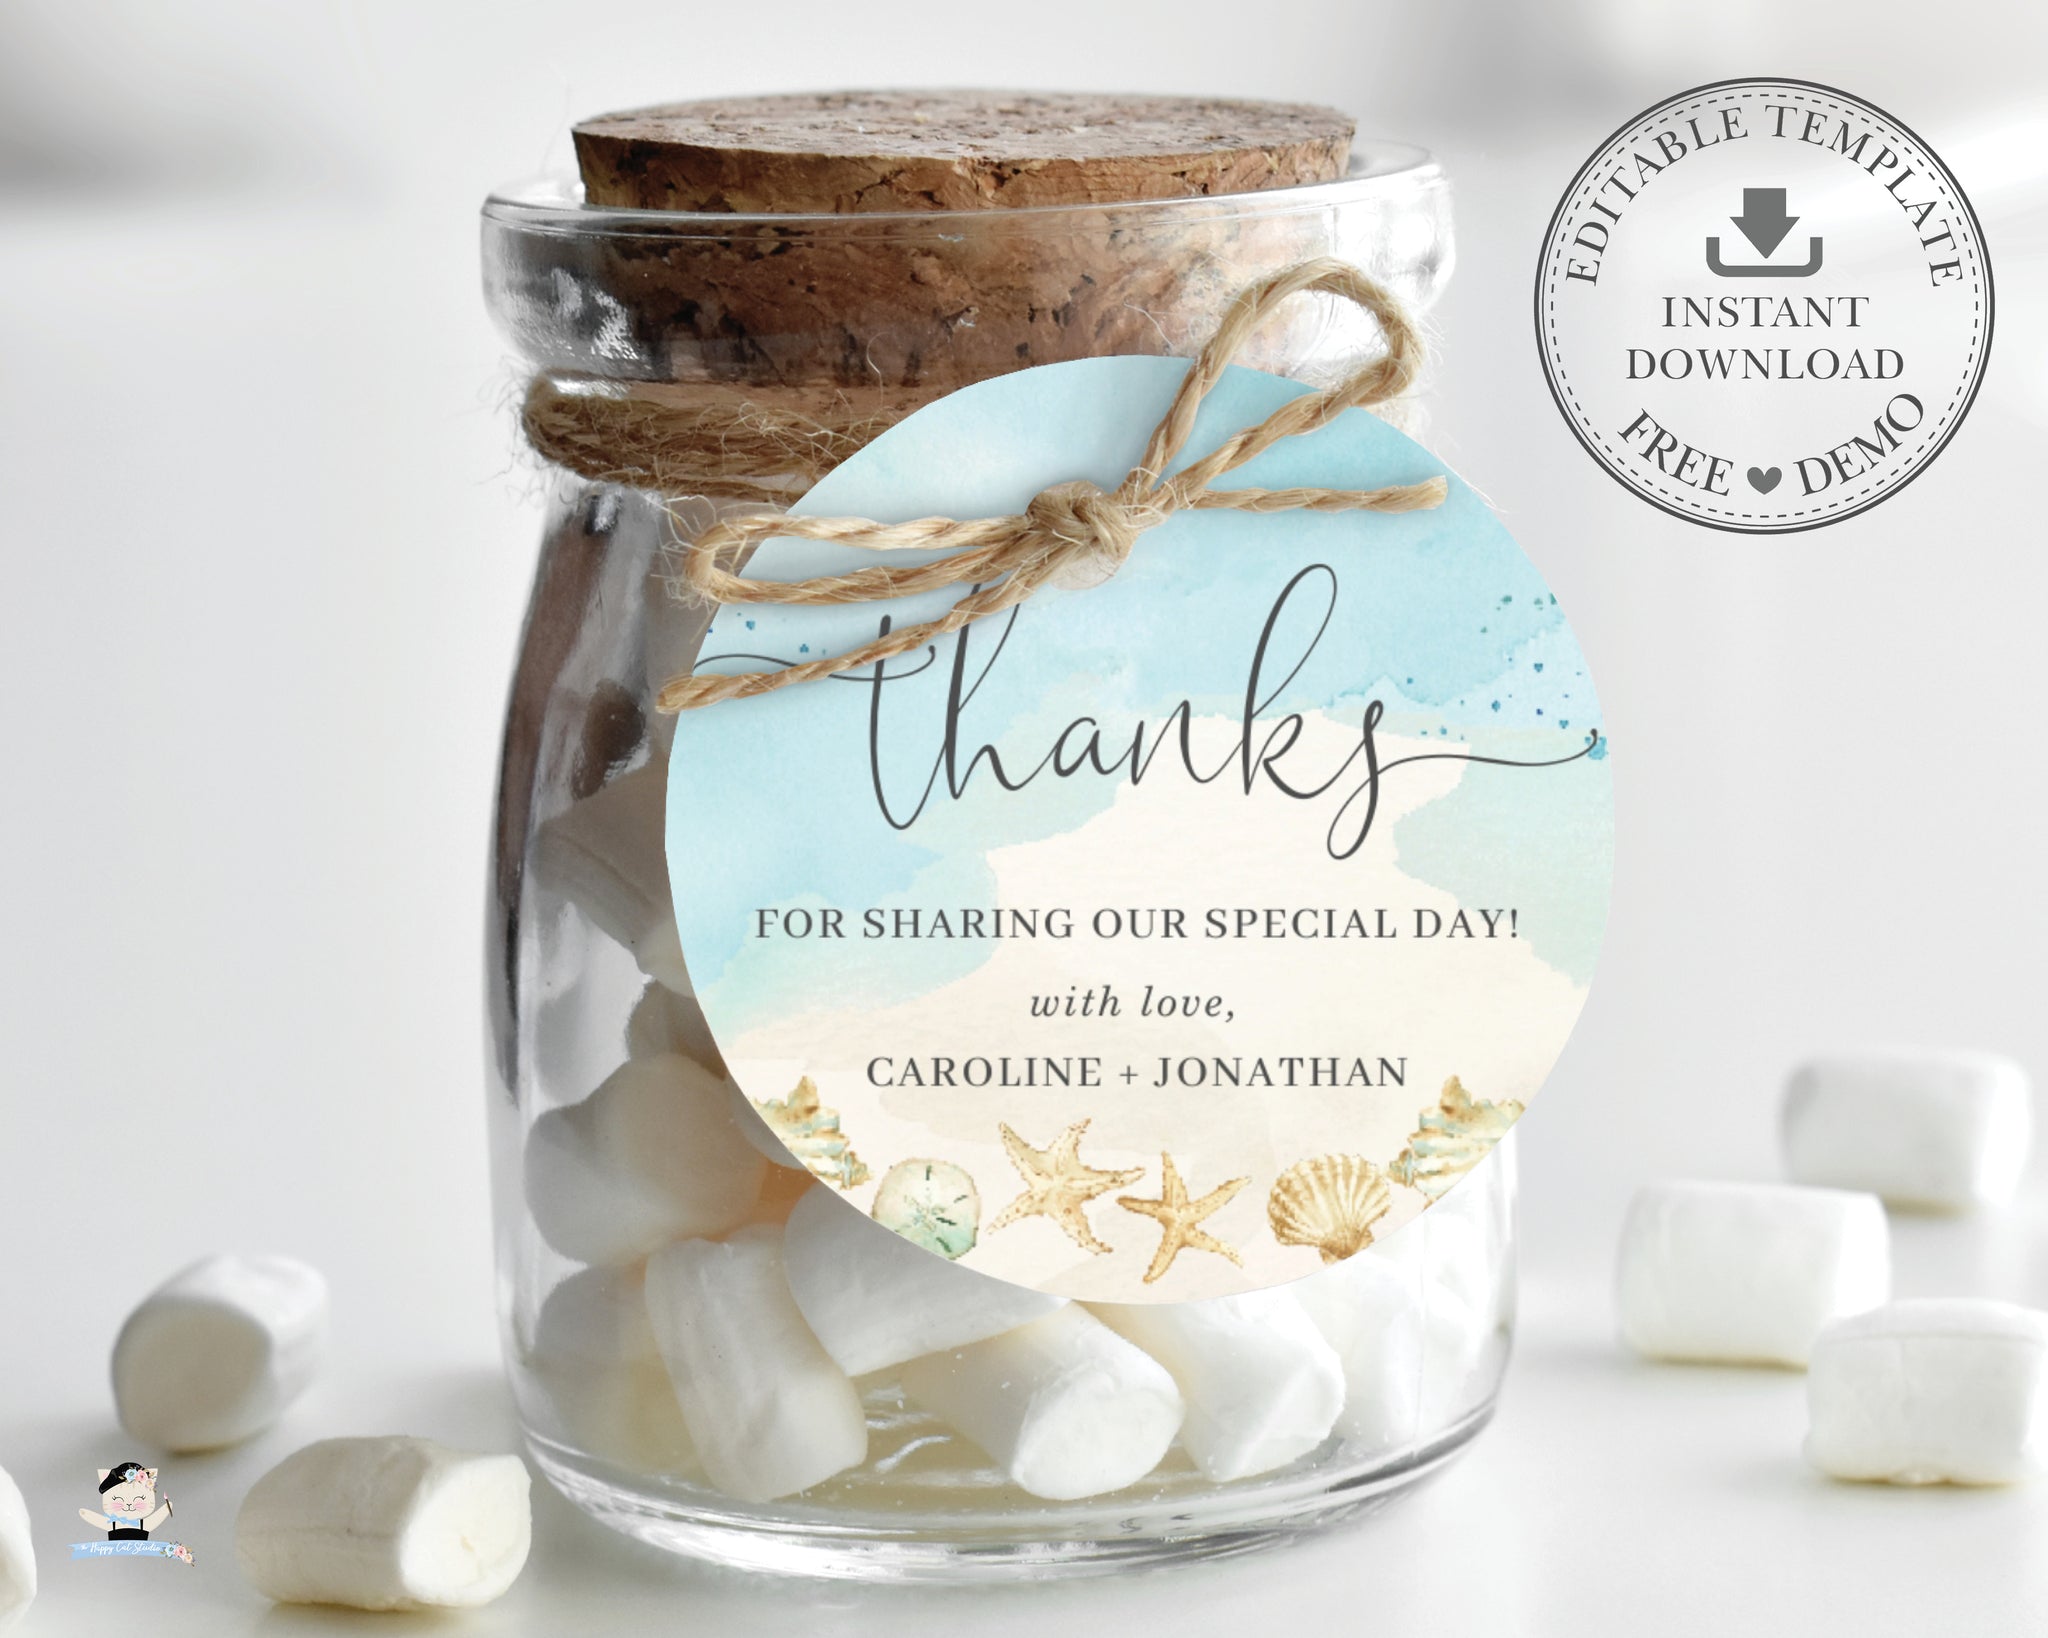 37 Free Wedding Label Templates To Celebrate the Big Day